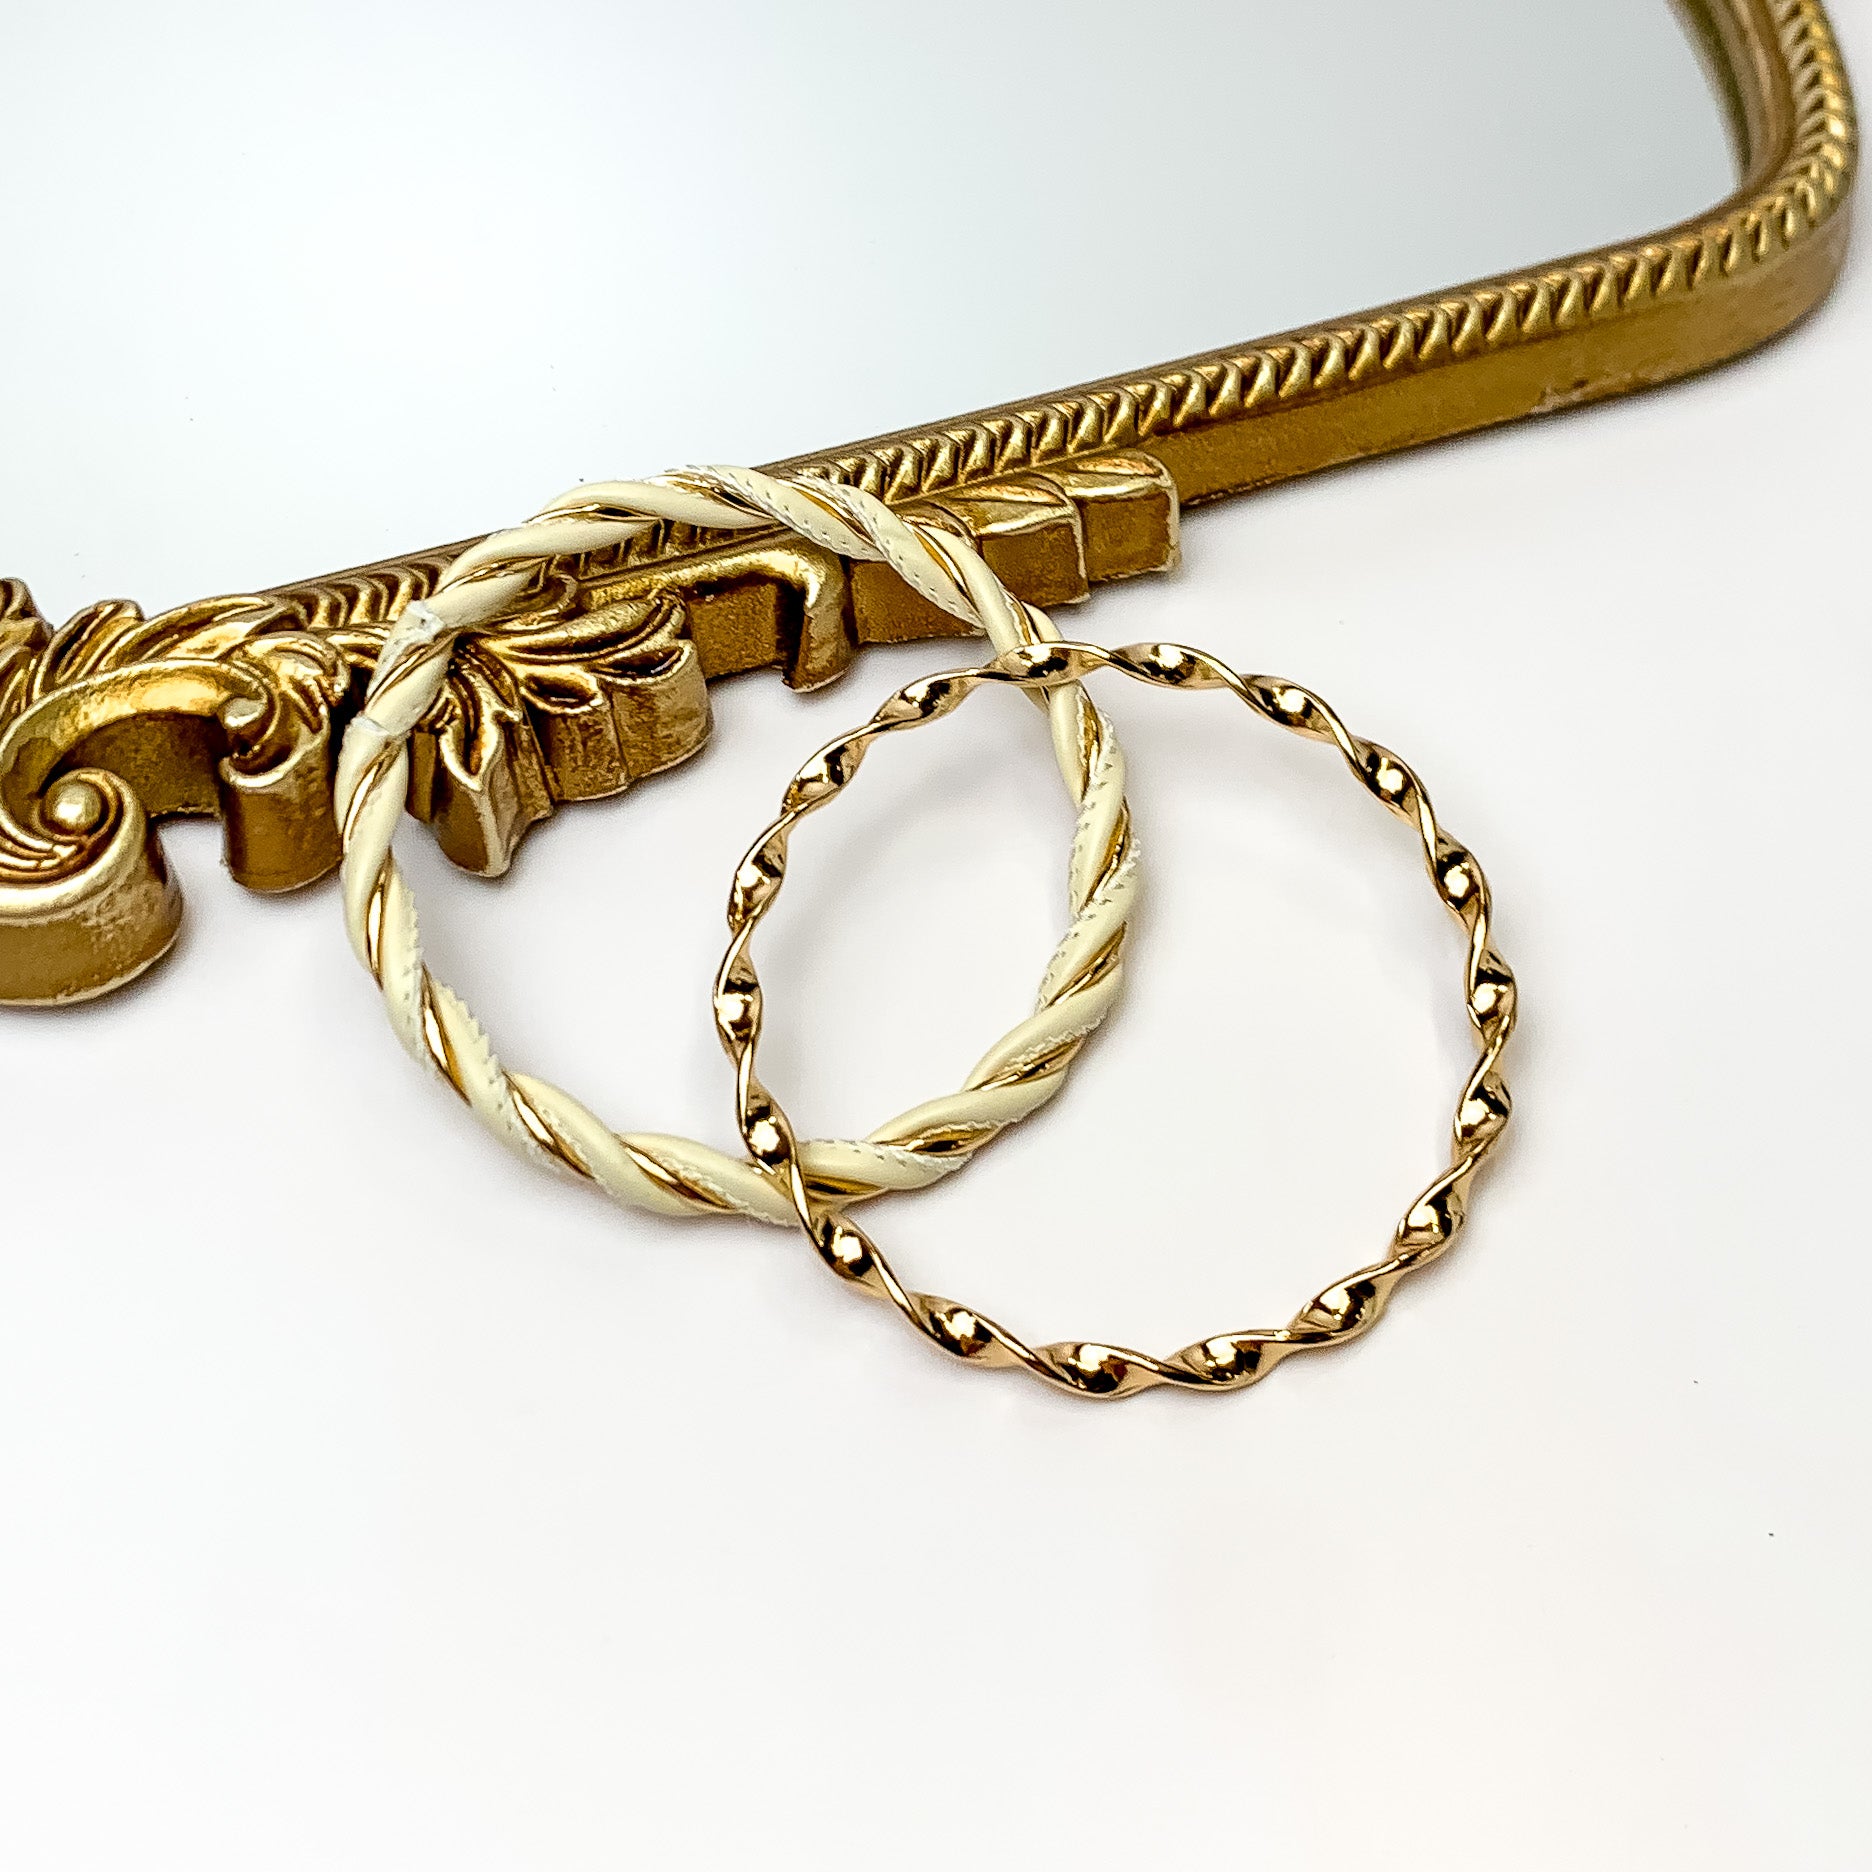 Pictured is a gold twist bangle and gold and ivory twist bangle. These bangles are pictured partially leaning on a gold mirror on a white background. 